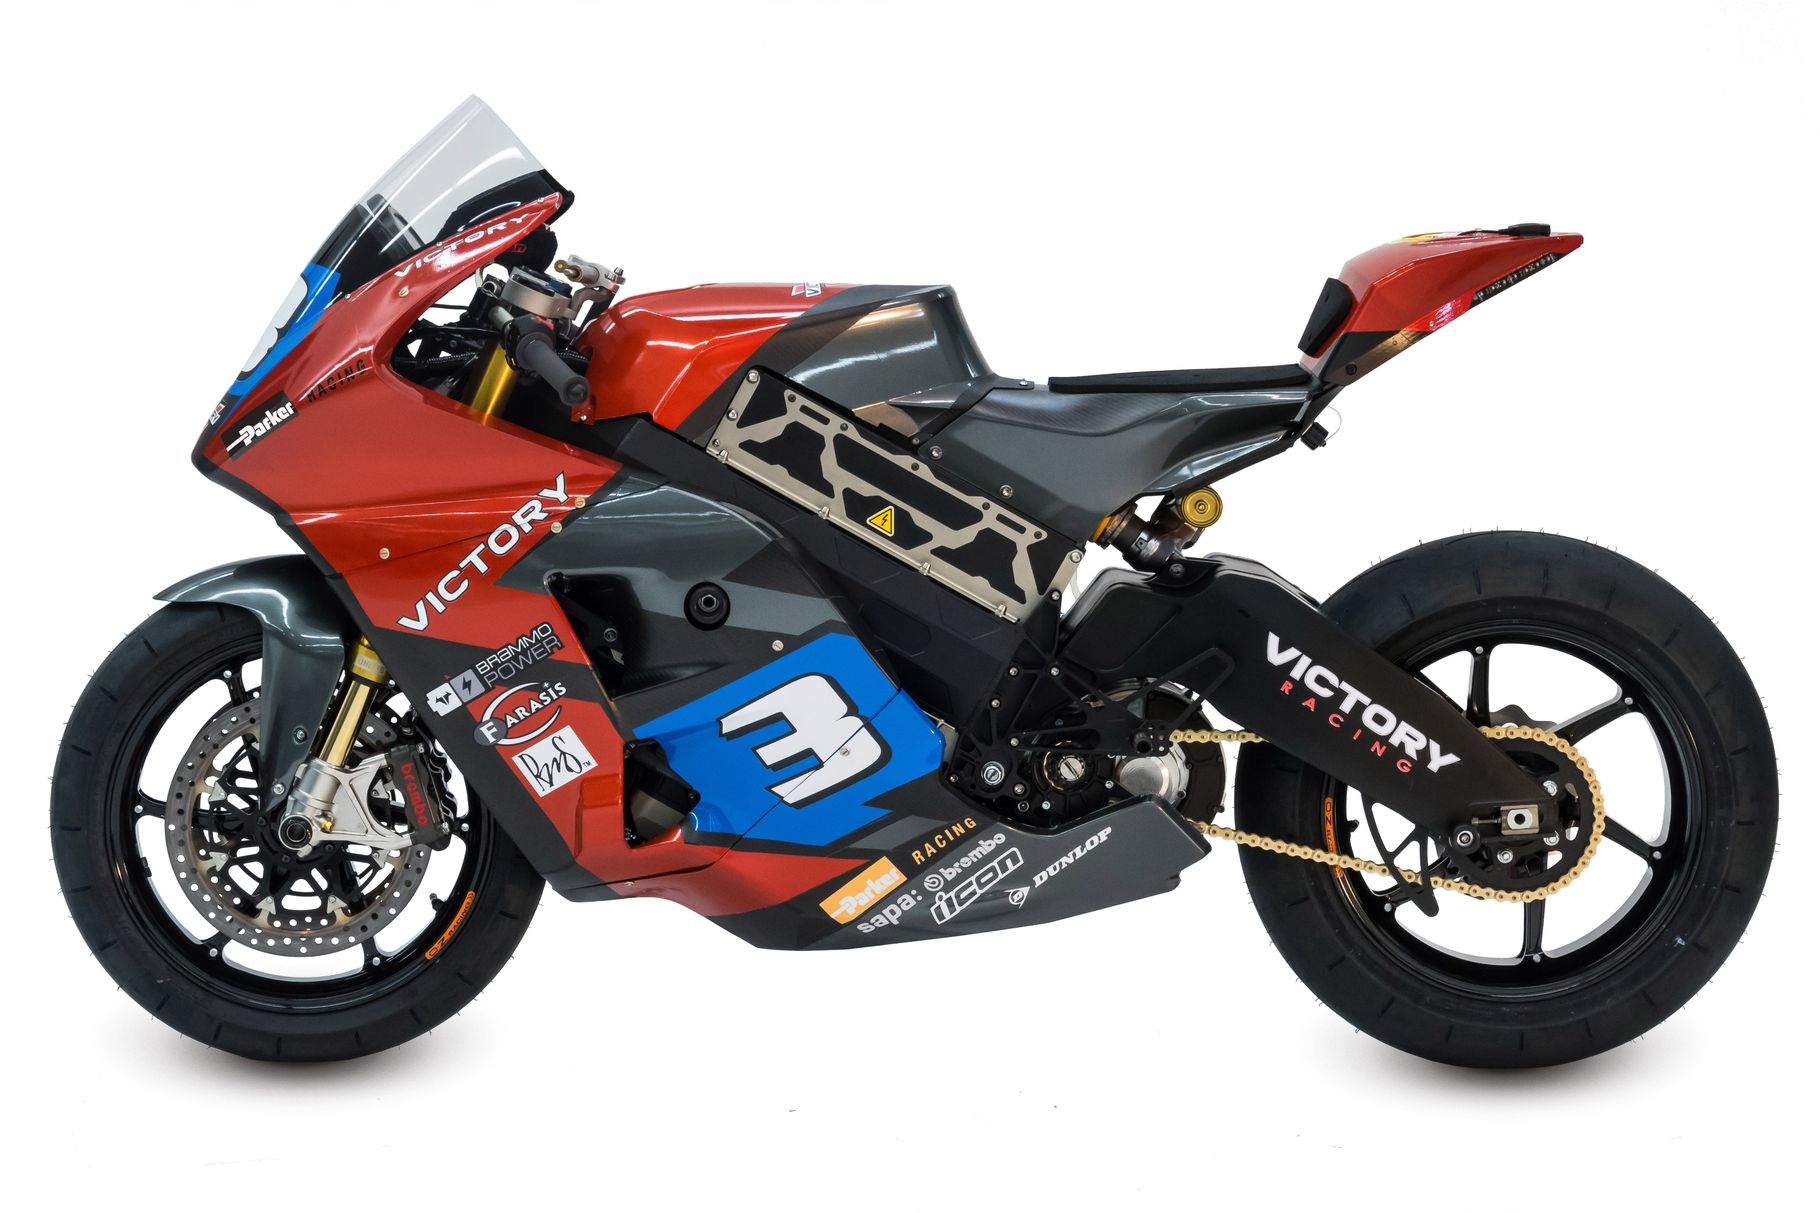 Victory built an electric race motorcycle for the insane Isle of Man TT